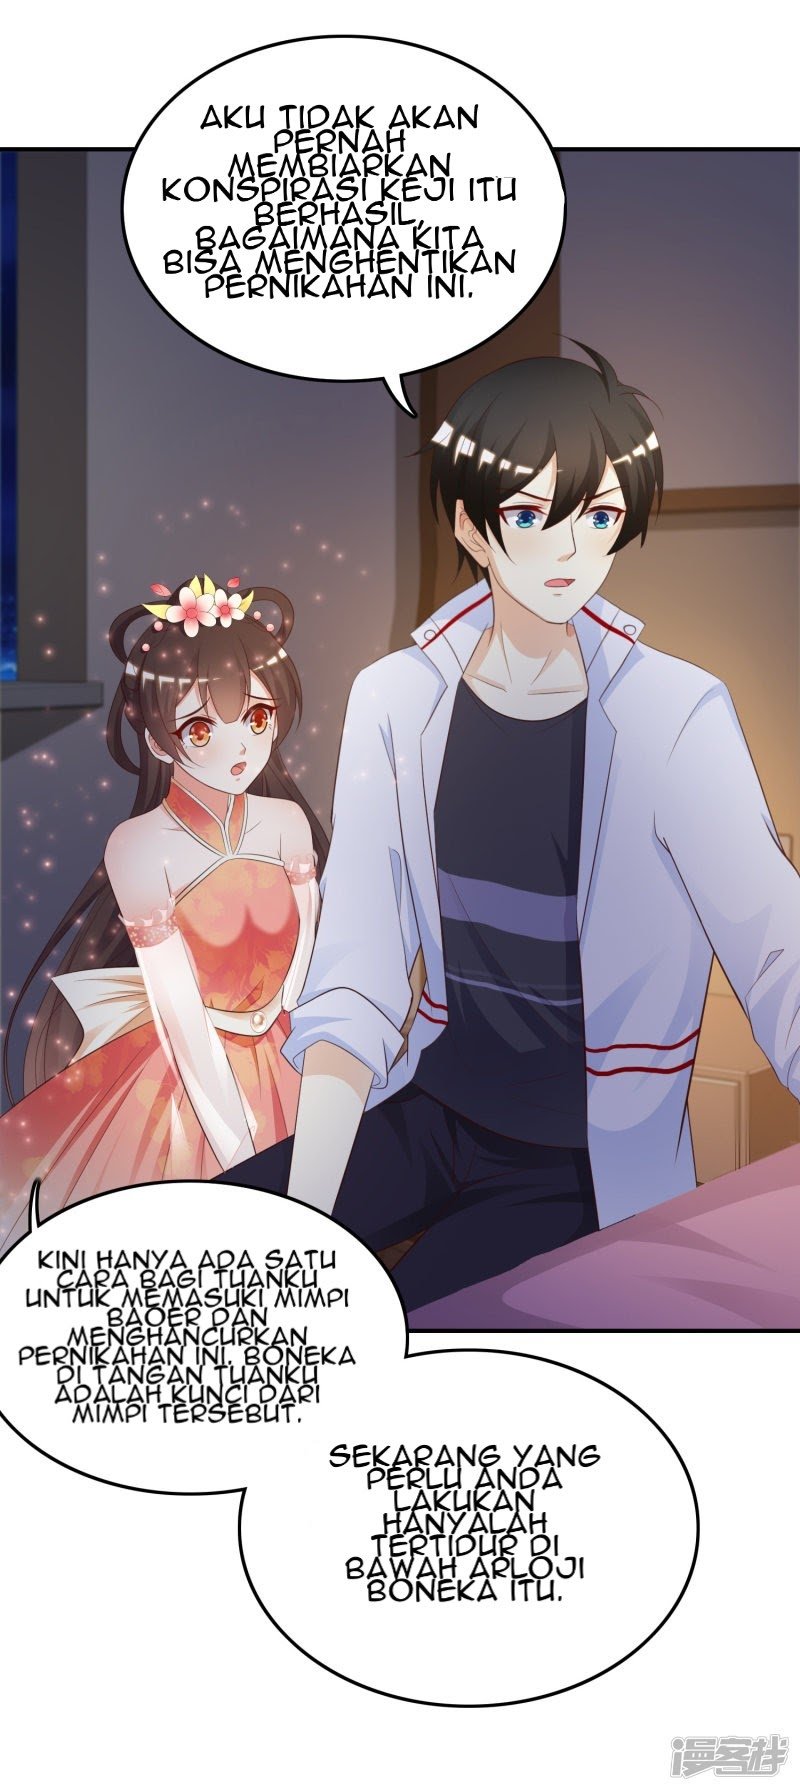 The Strongest Peach Blossom Chapter 33